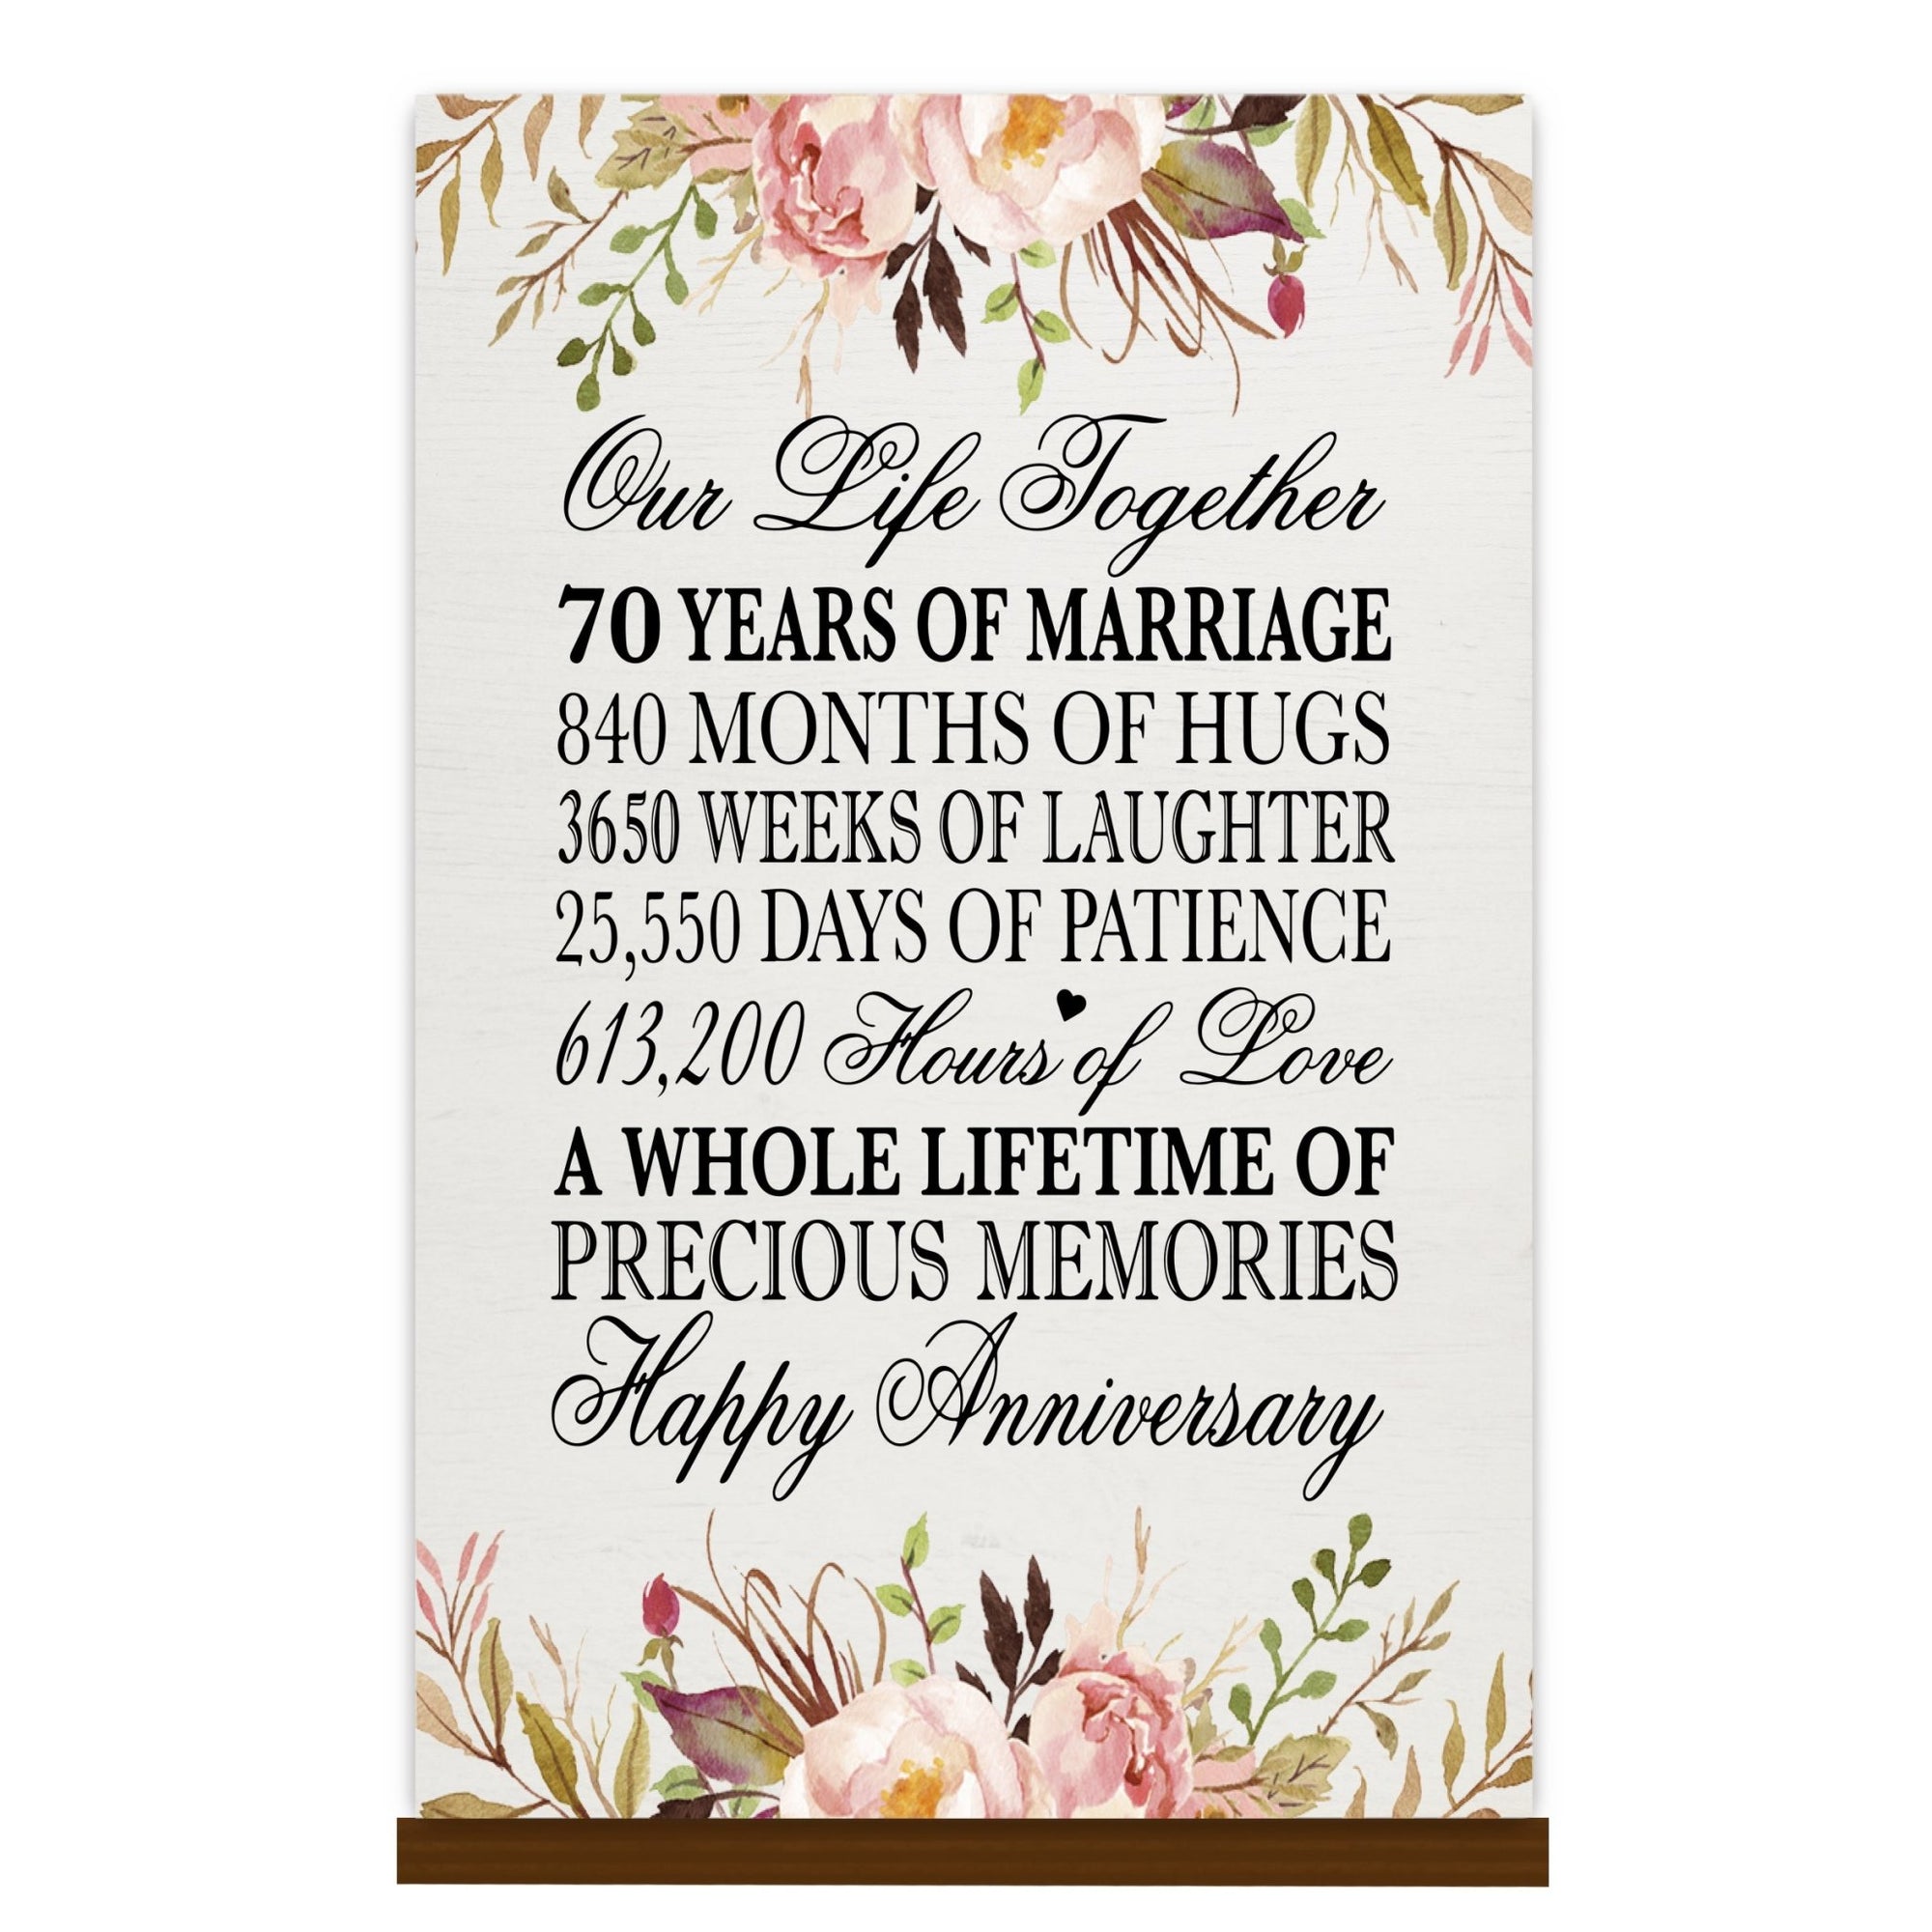 70th Wedding Anniversary Wall Plaque - Our Life Together - LifeSong Milestones